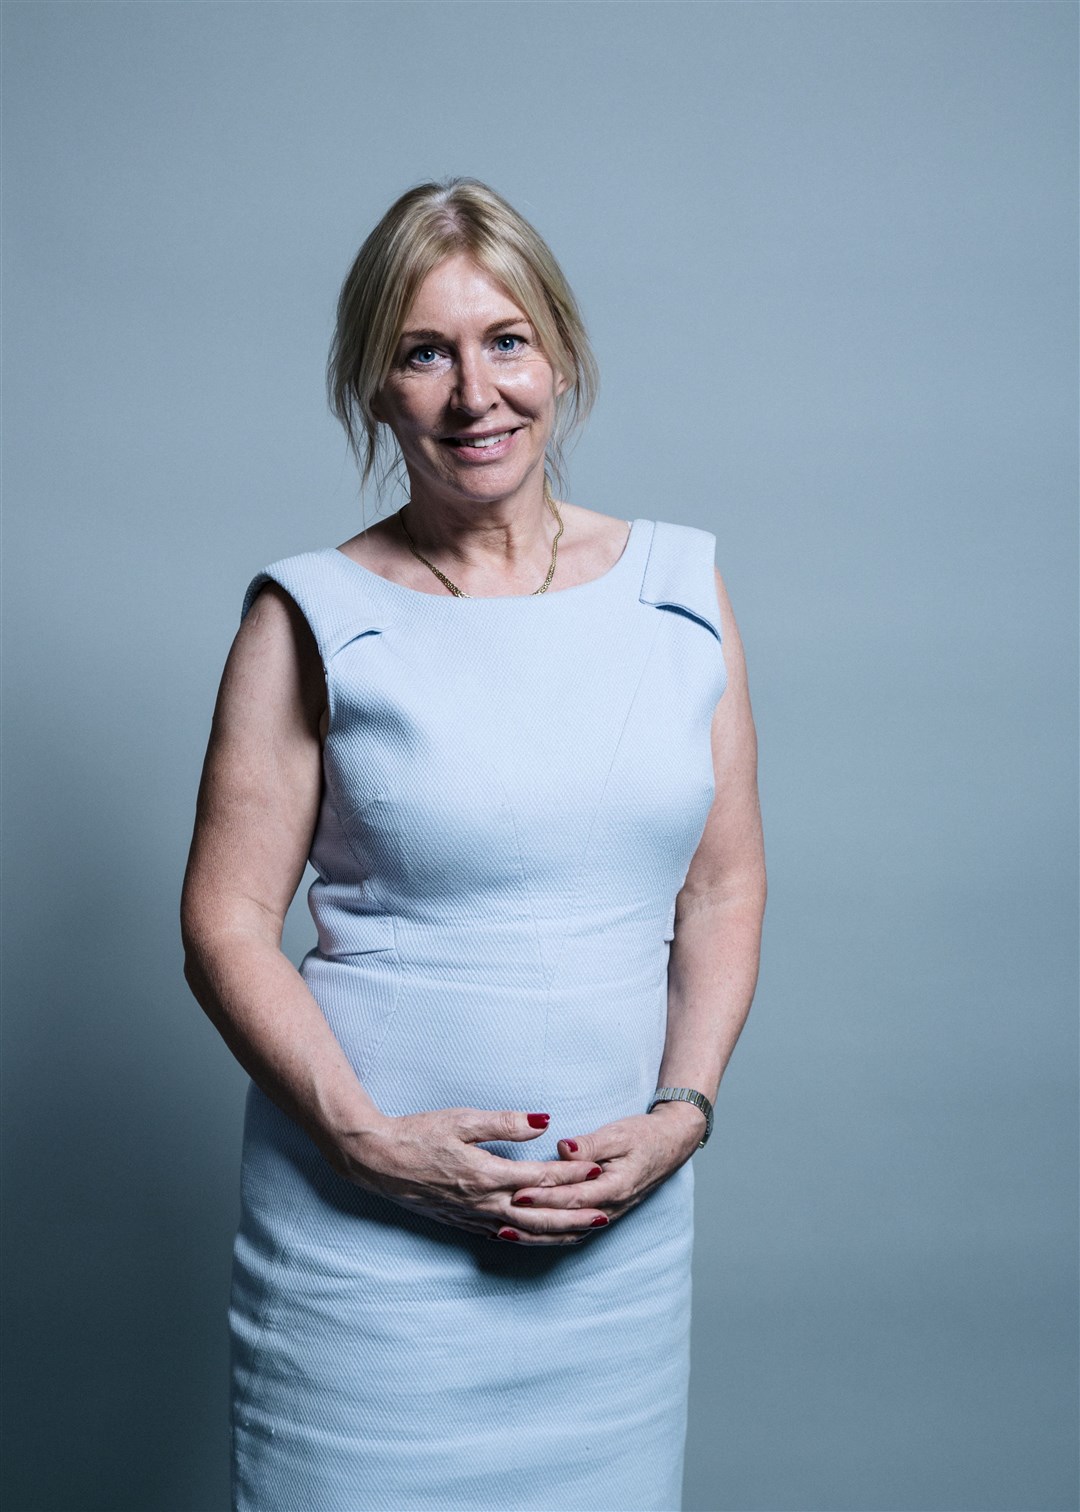 Nadine Dorries, who had also announced she was going to resign, is staying on while she seeks to investigate how she was denied a seat in the Lords (Chris McAndrew/UK Parliament/PA)